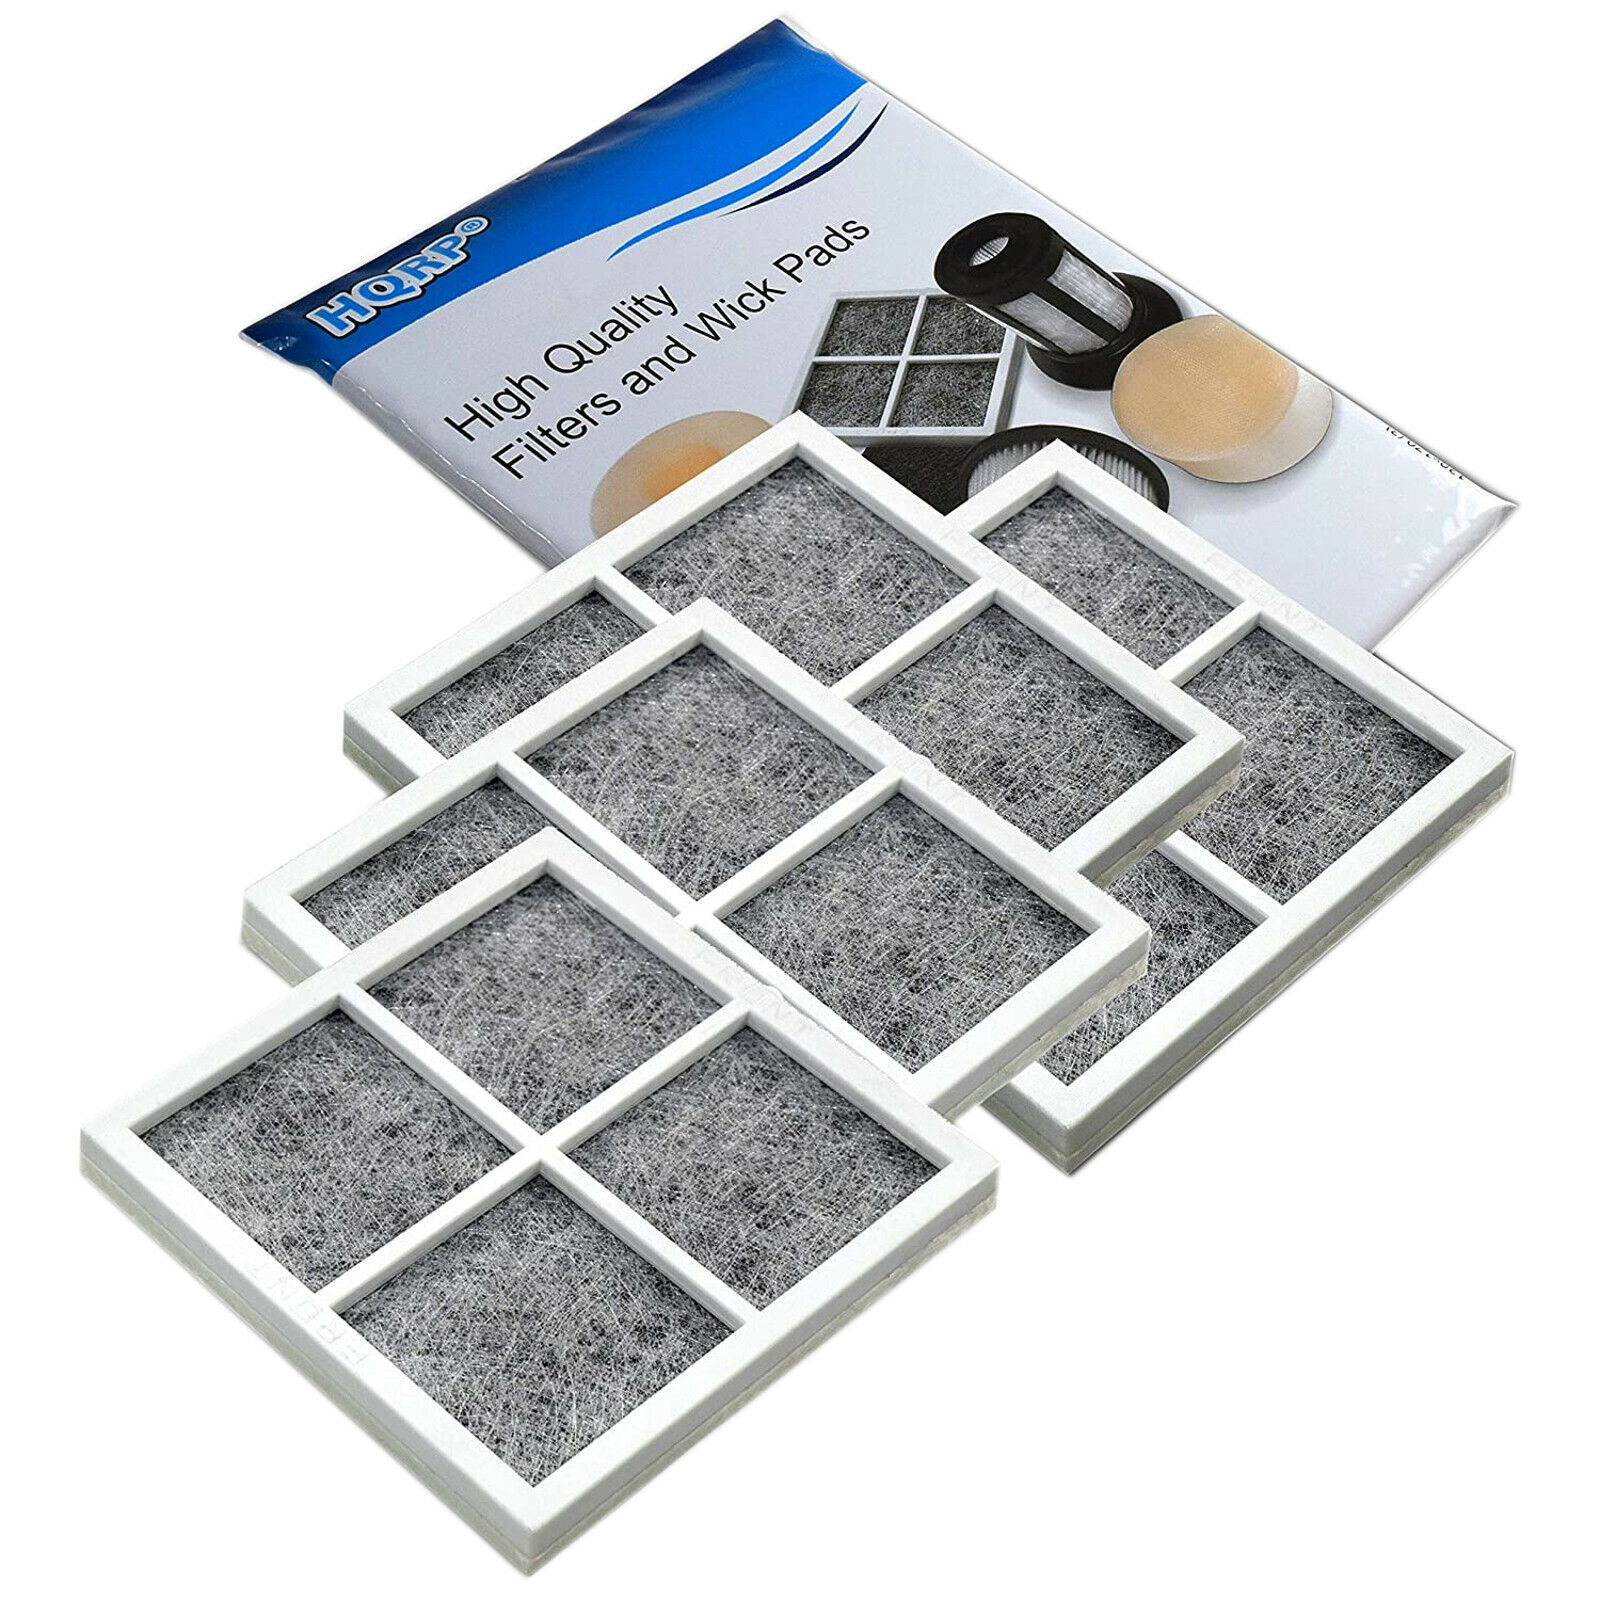 Primary image for 4-Pack Air Filter for LG LFXS29766S LFXS30786S LFXS30796D LFXS32726S LFXS32736D